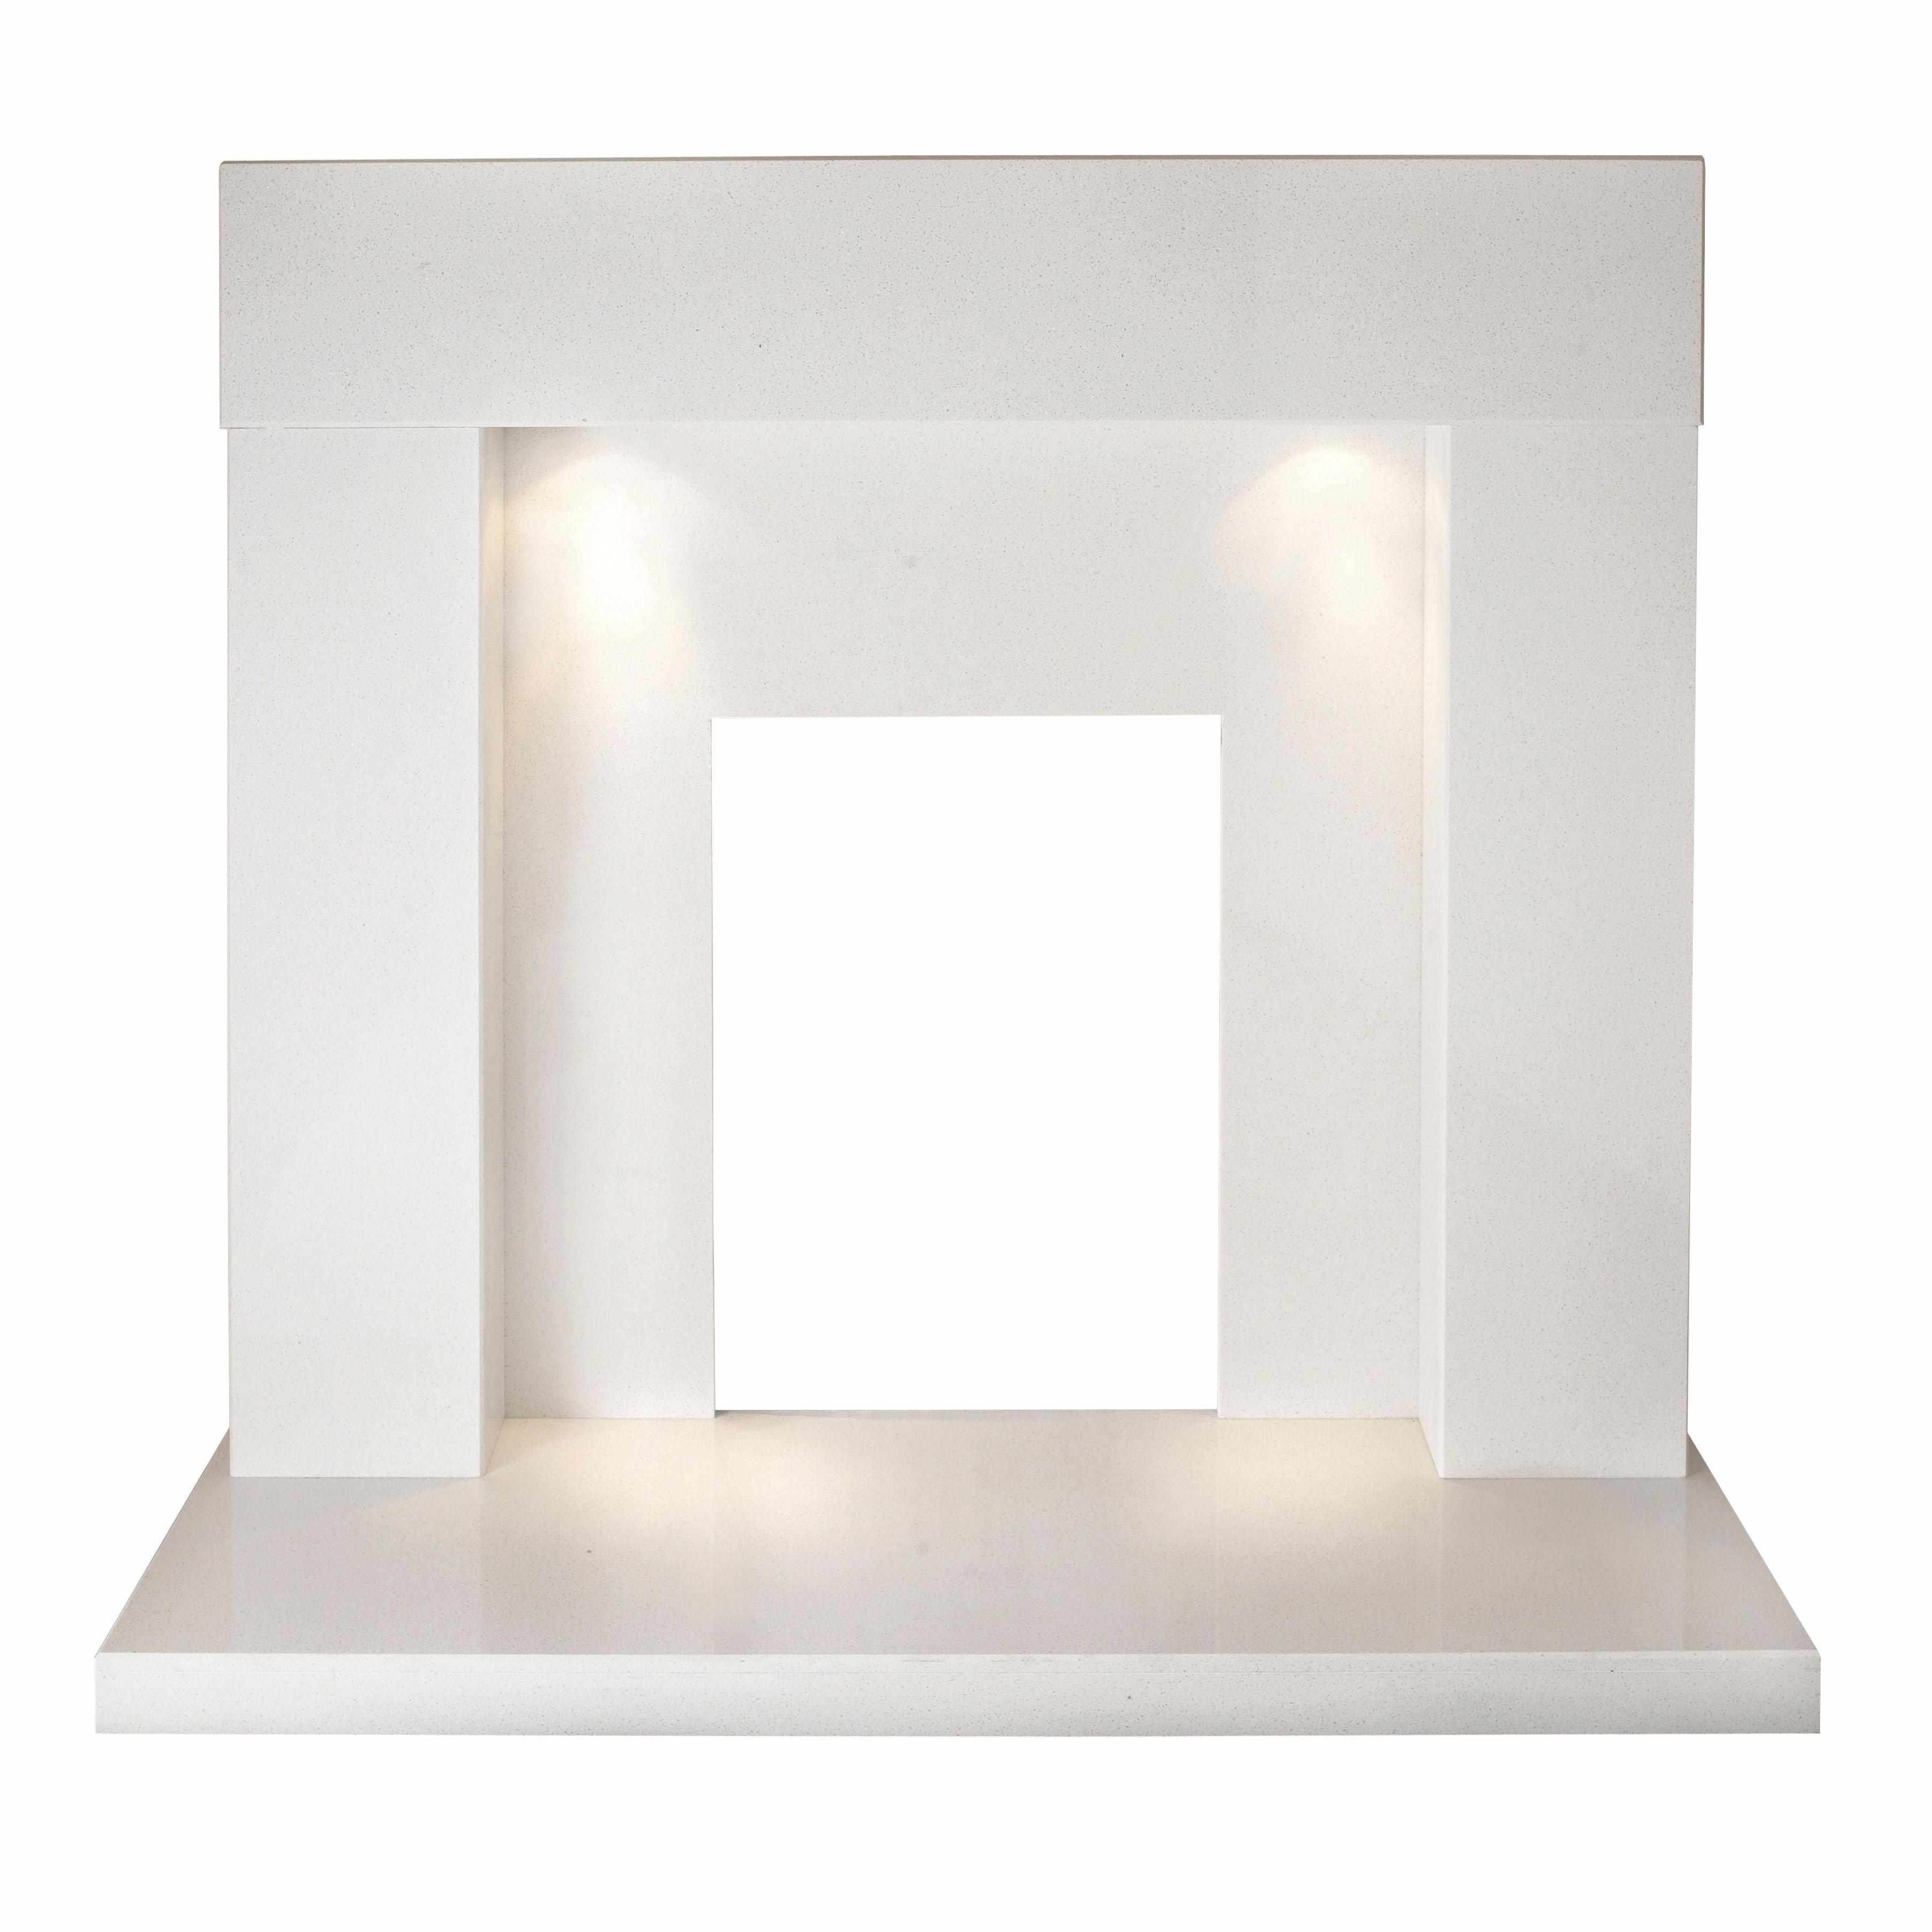 The Cuba Fireplace in Sparkly White with Downlights